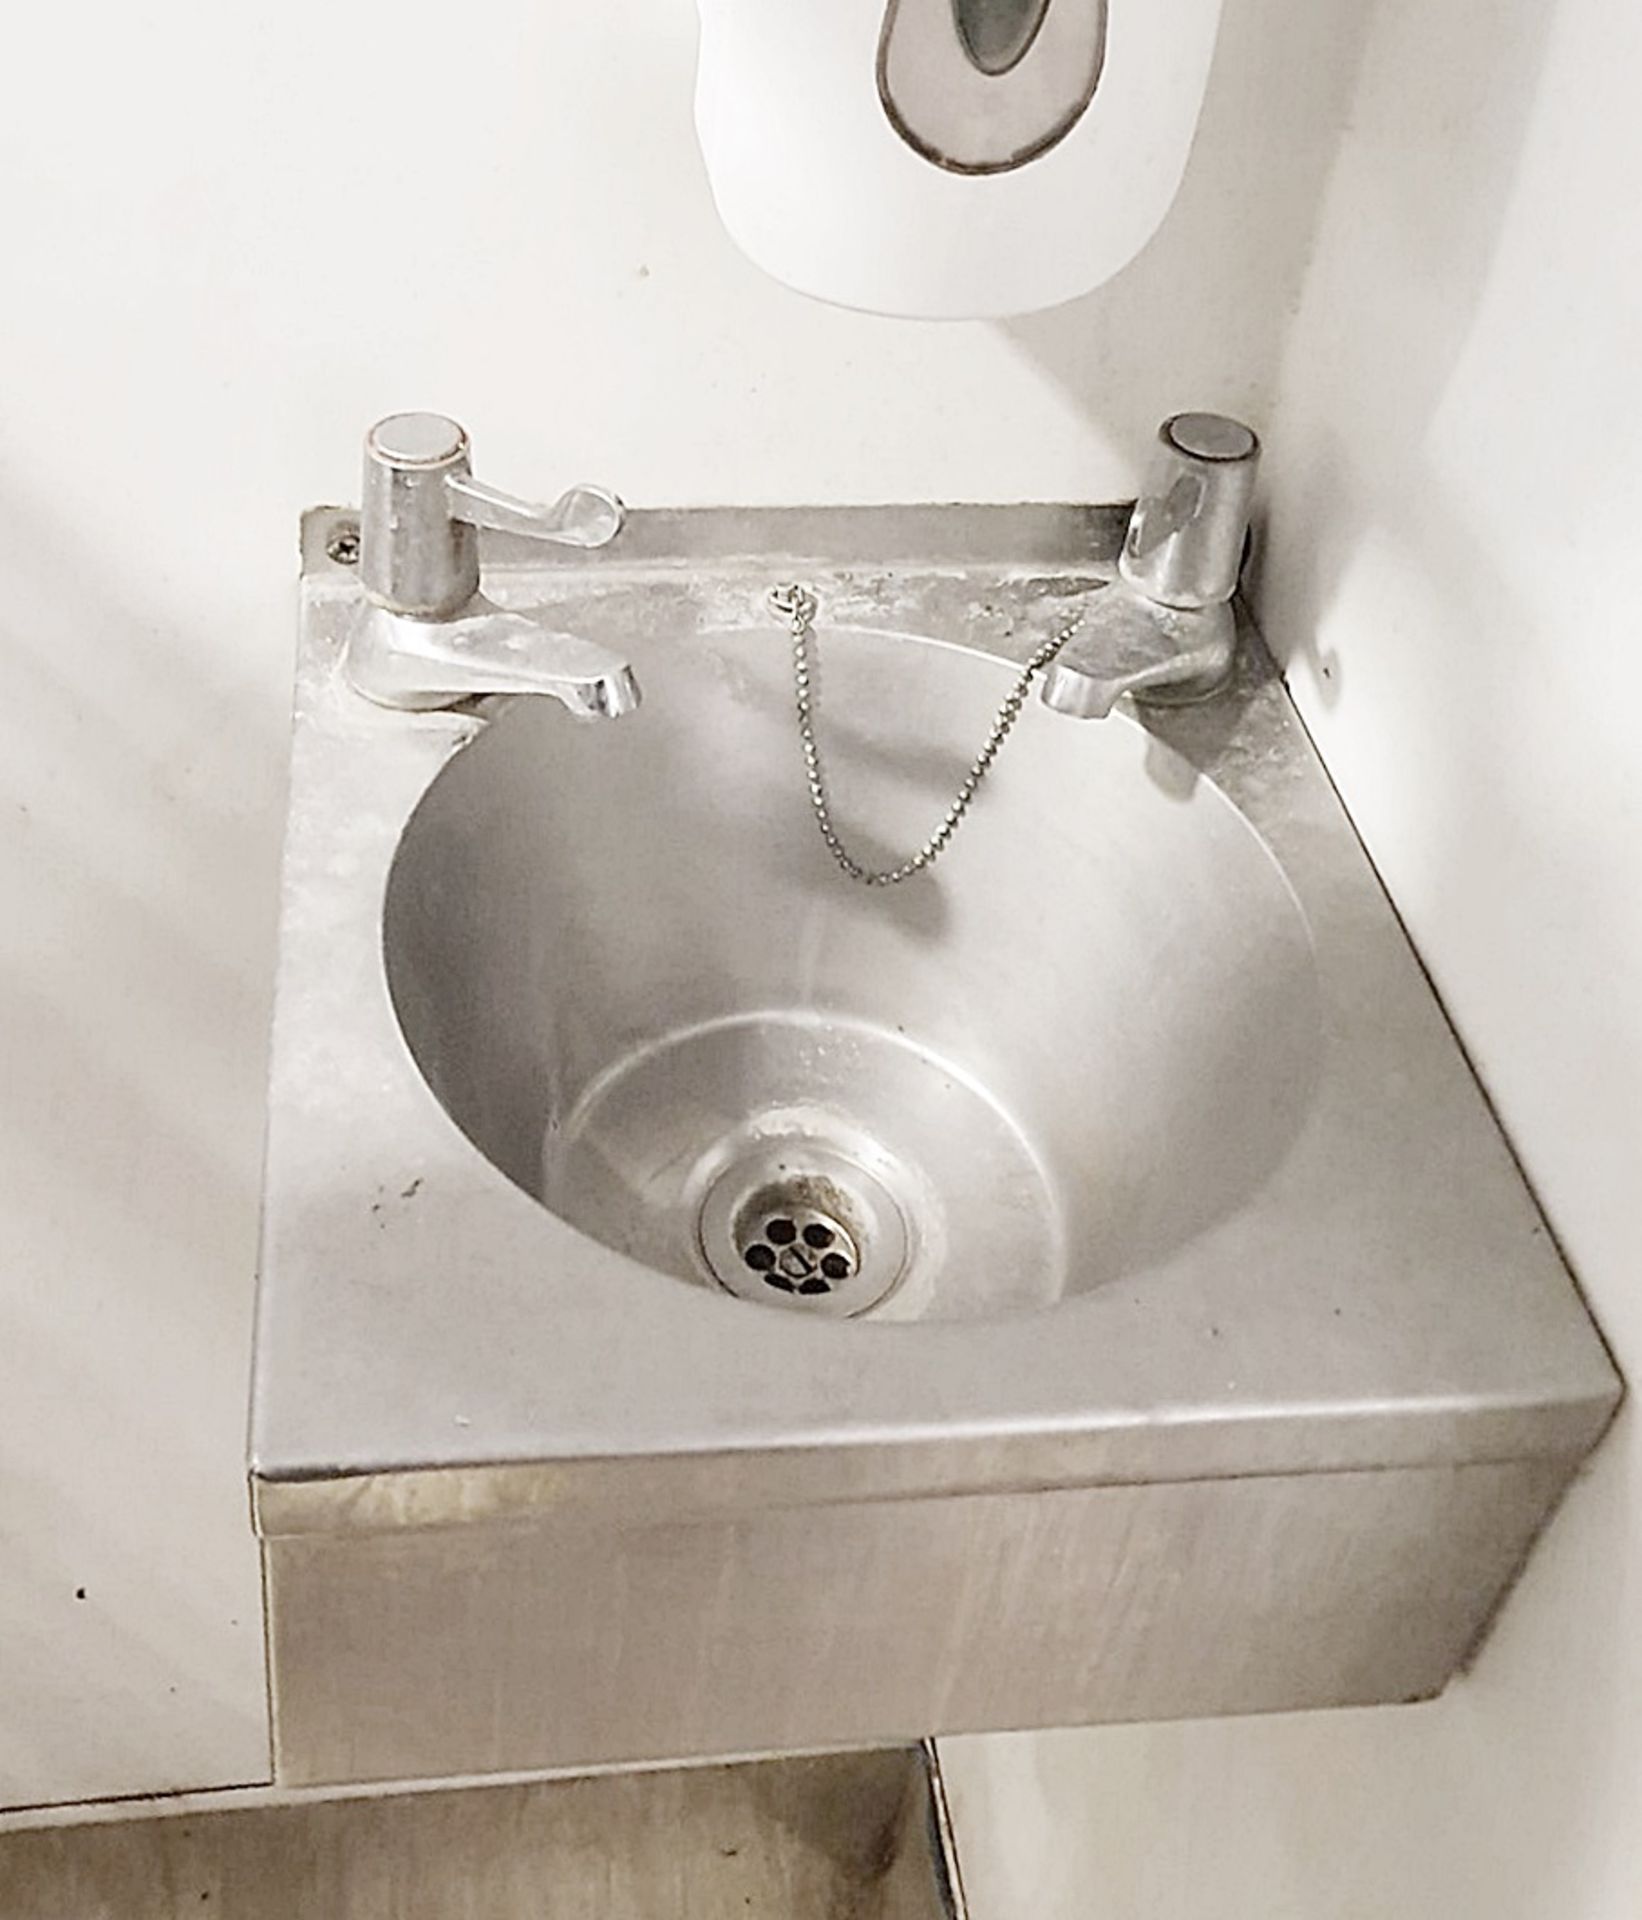 1 x Stainless Steel Hand Wash Sink Basin With Soap Dispenser - Ref PA - CL463 - Location: Newbury - Image 2 of 2